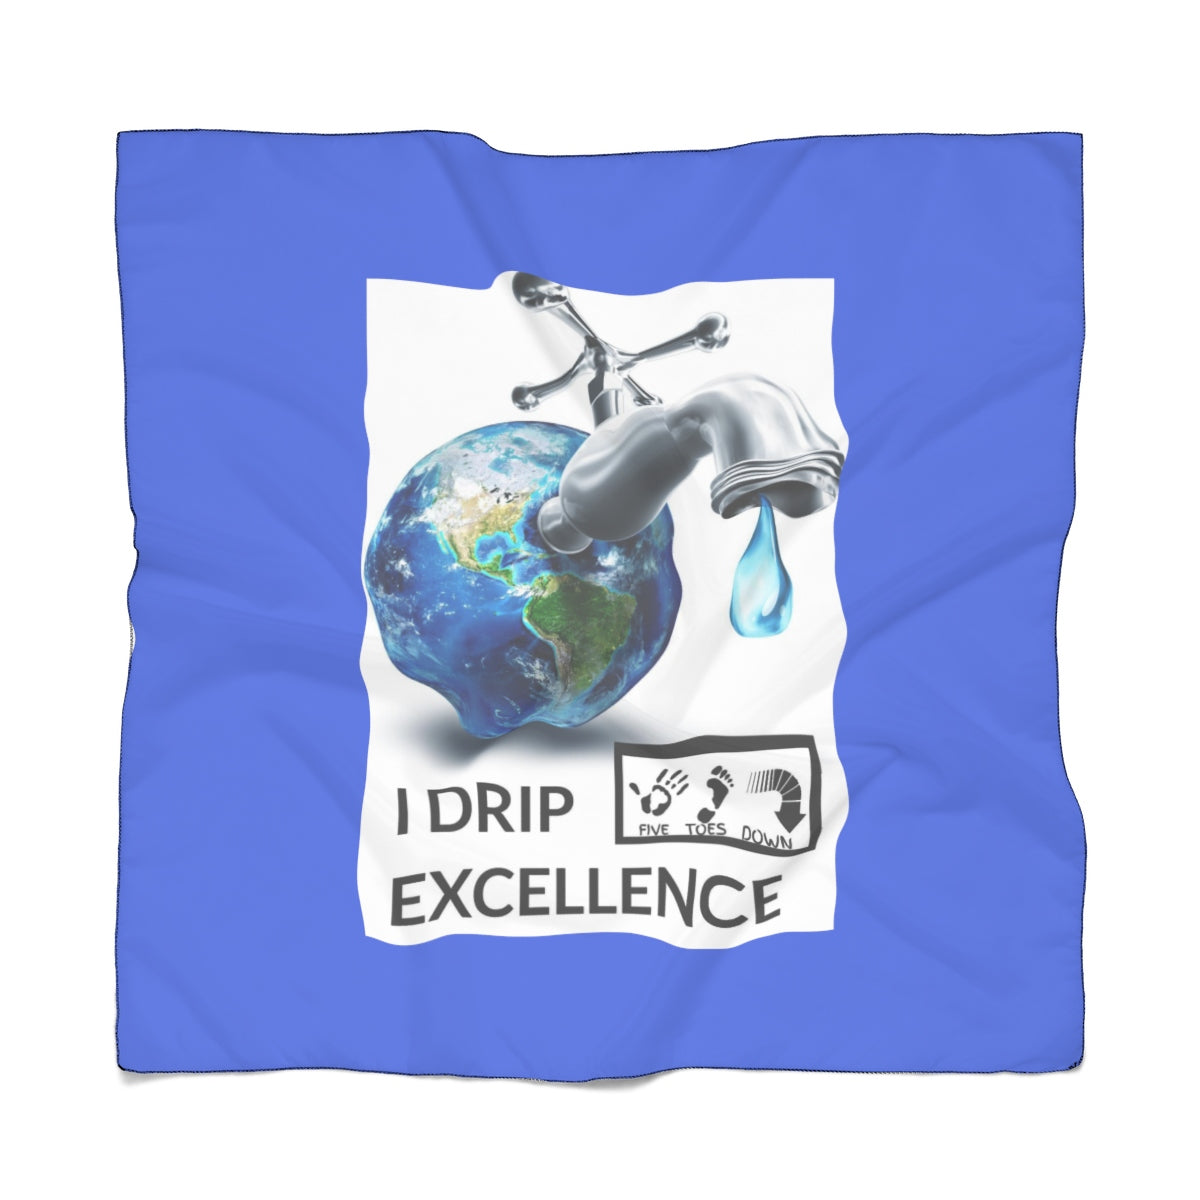 Five Toes Down Drip Excellence Poly Scarf